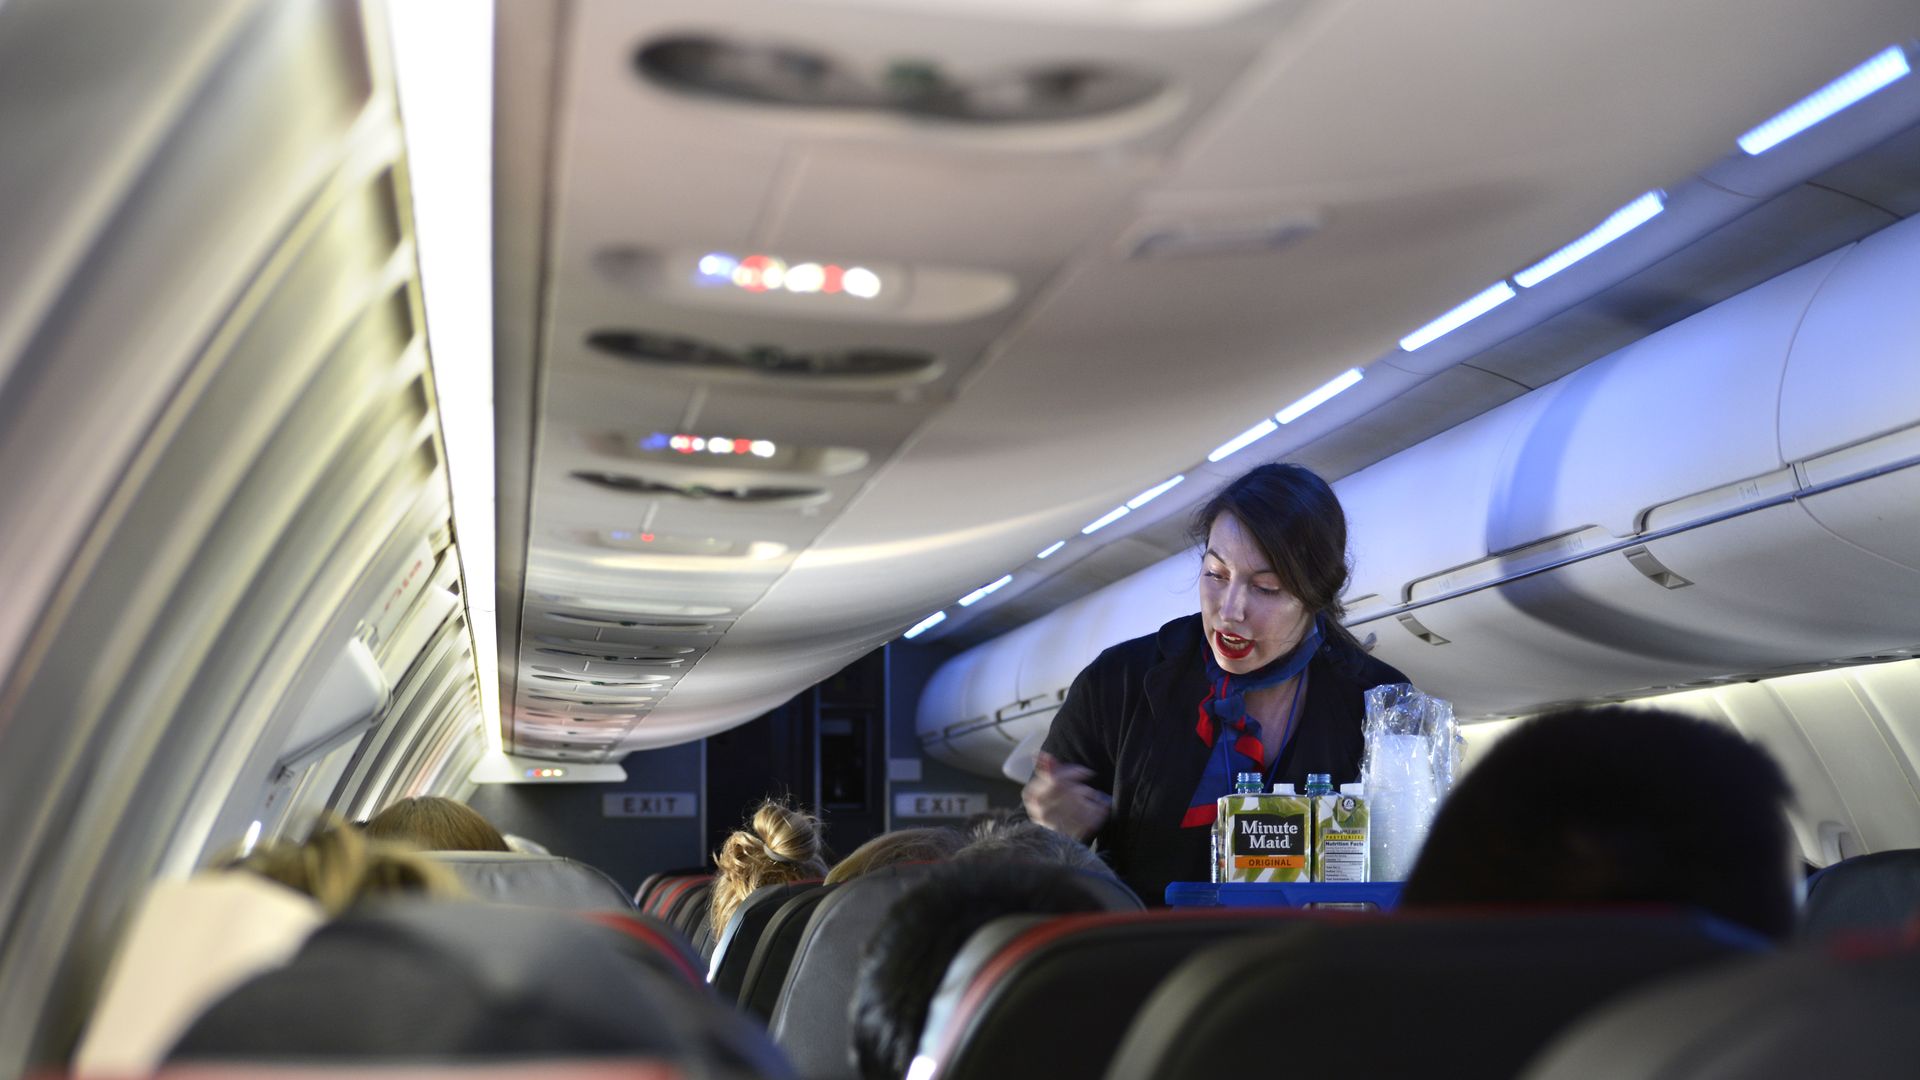 In this image, a stewardess walks down an airplane aisle offering drinks.